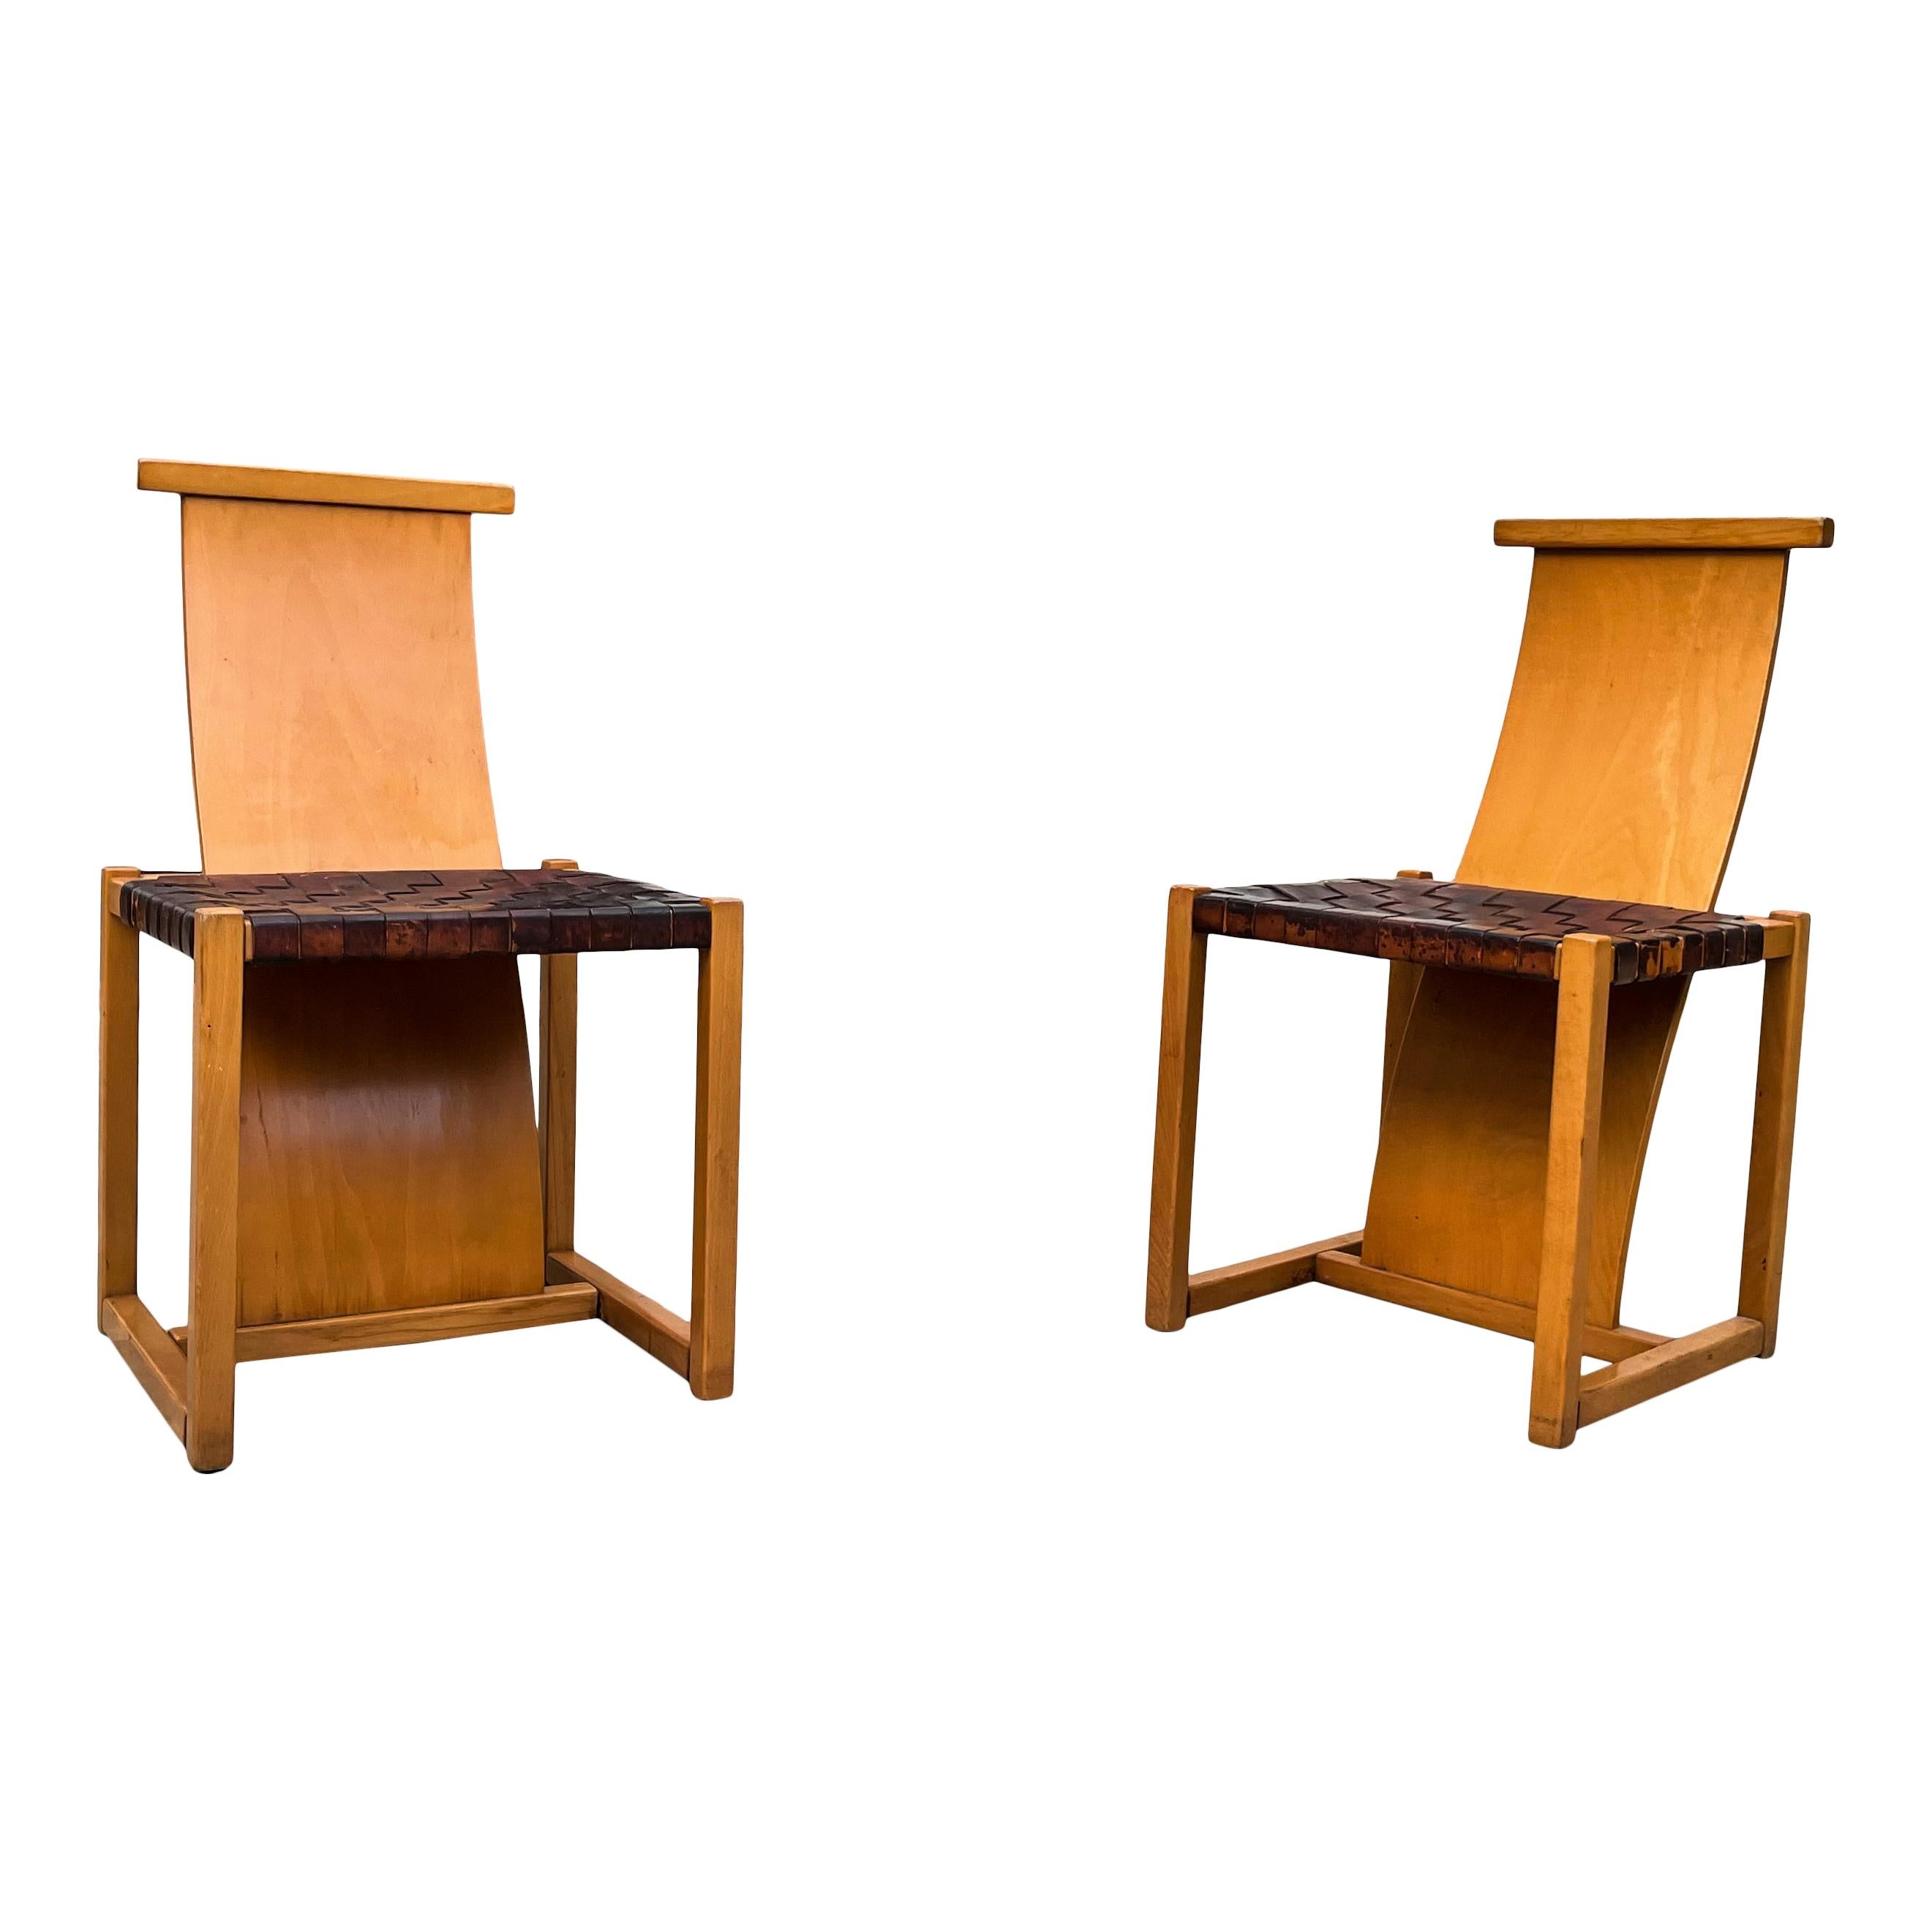 Midcentury Modern Italian Design Beech & Leather Dining Chairs, 1970s, Set of 4 For Sale 3